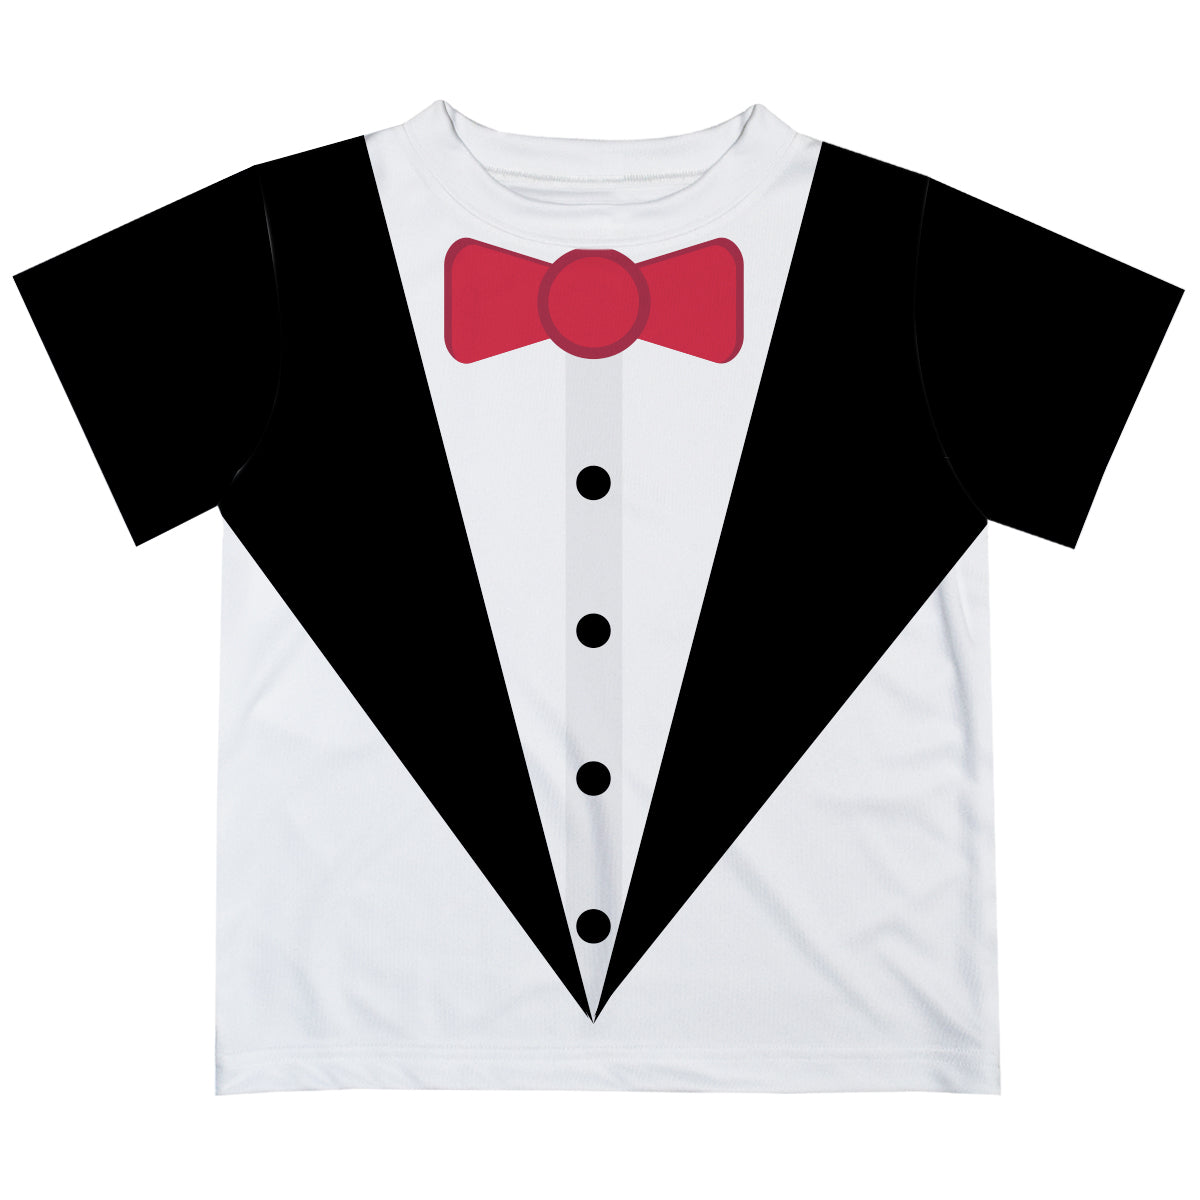 Boys gray and black suit tee shirt - Wimziy&Co.